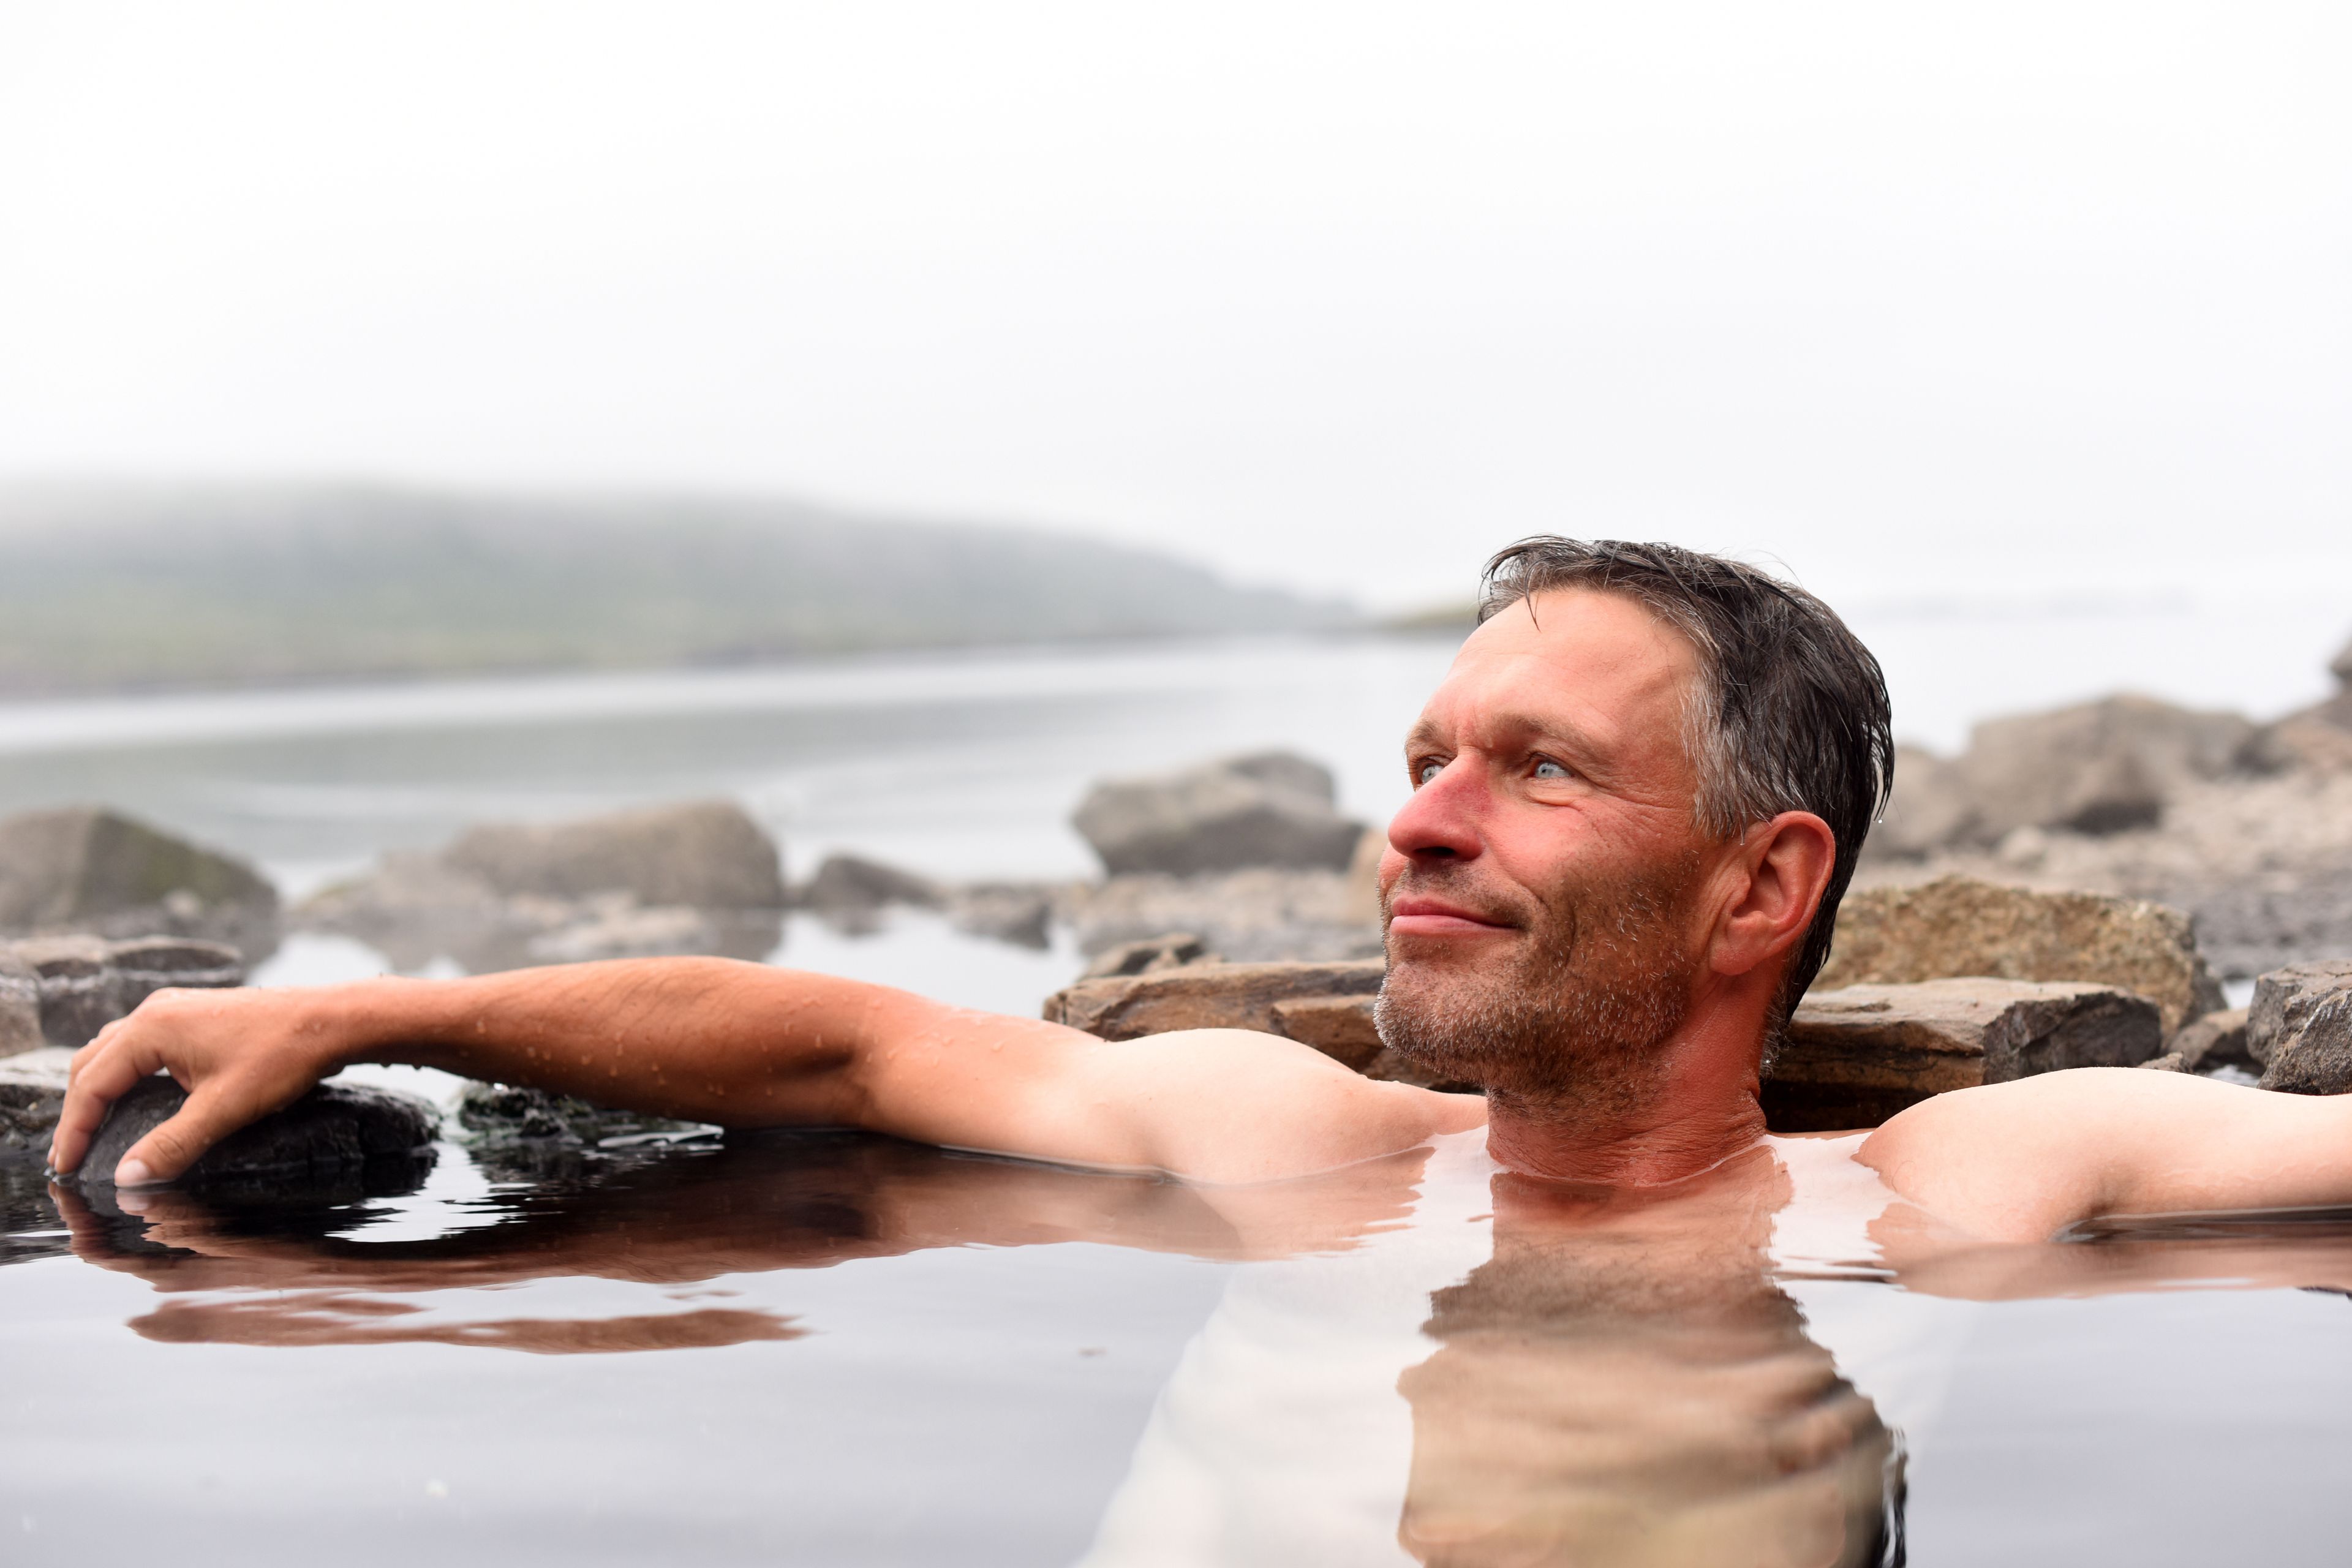 Visiting iceland: Relaxing in Iceland's natural spring in late june